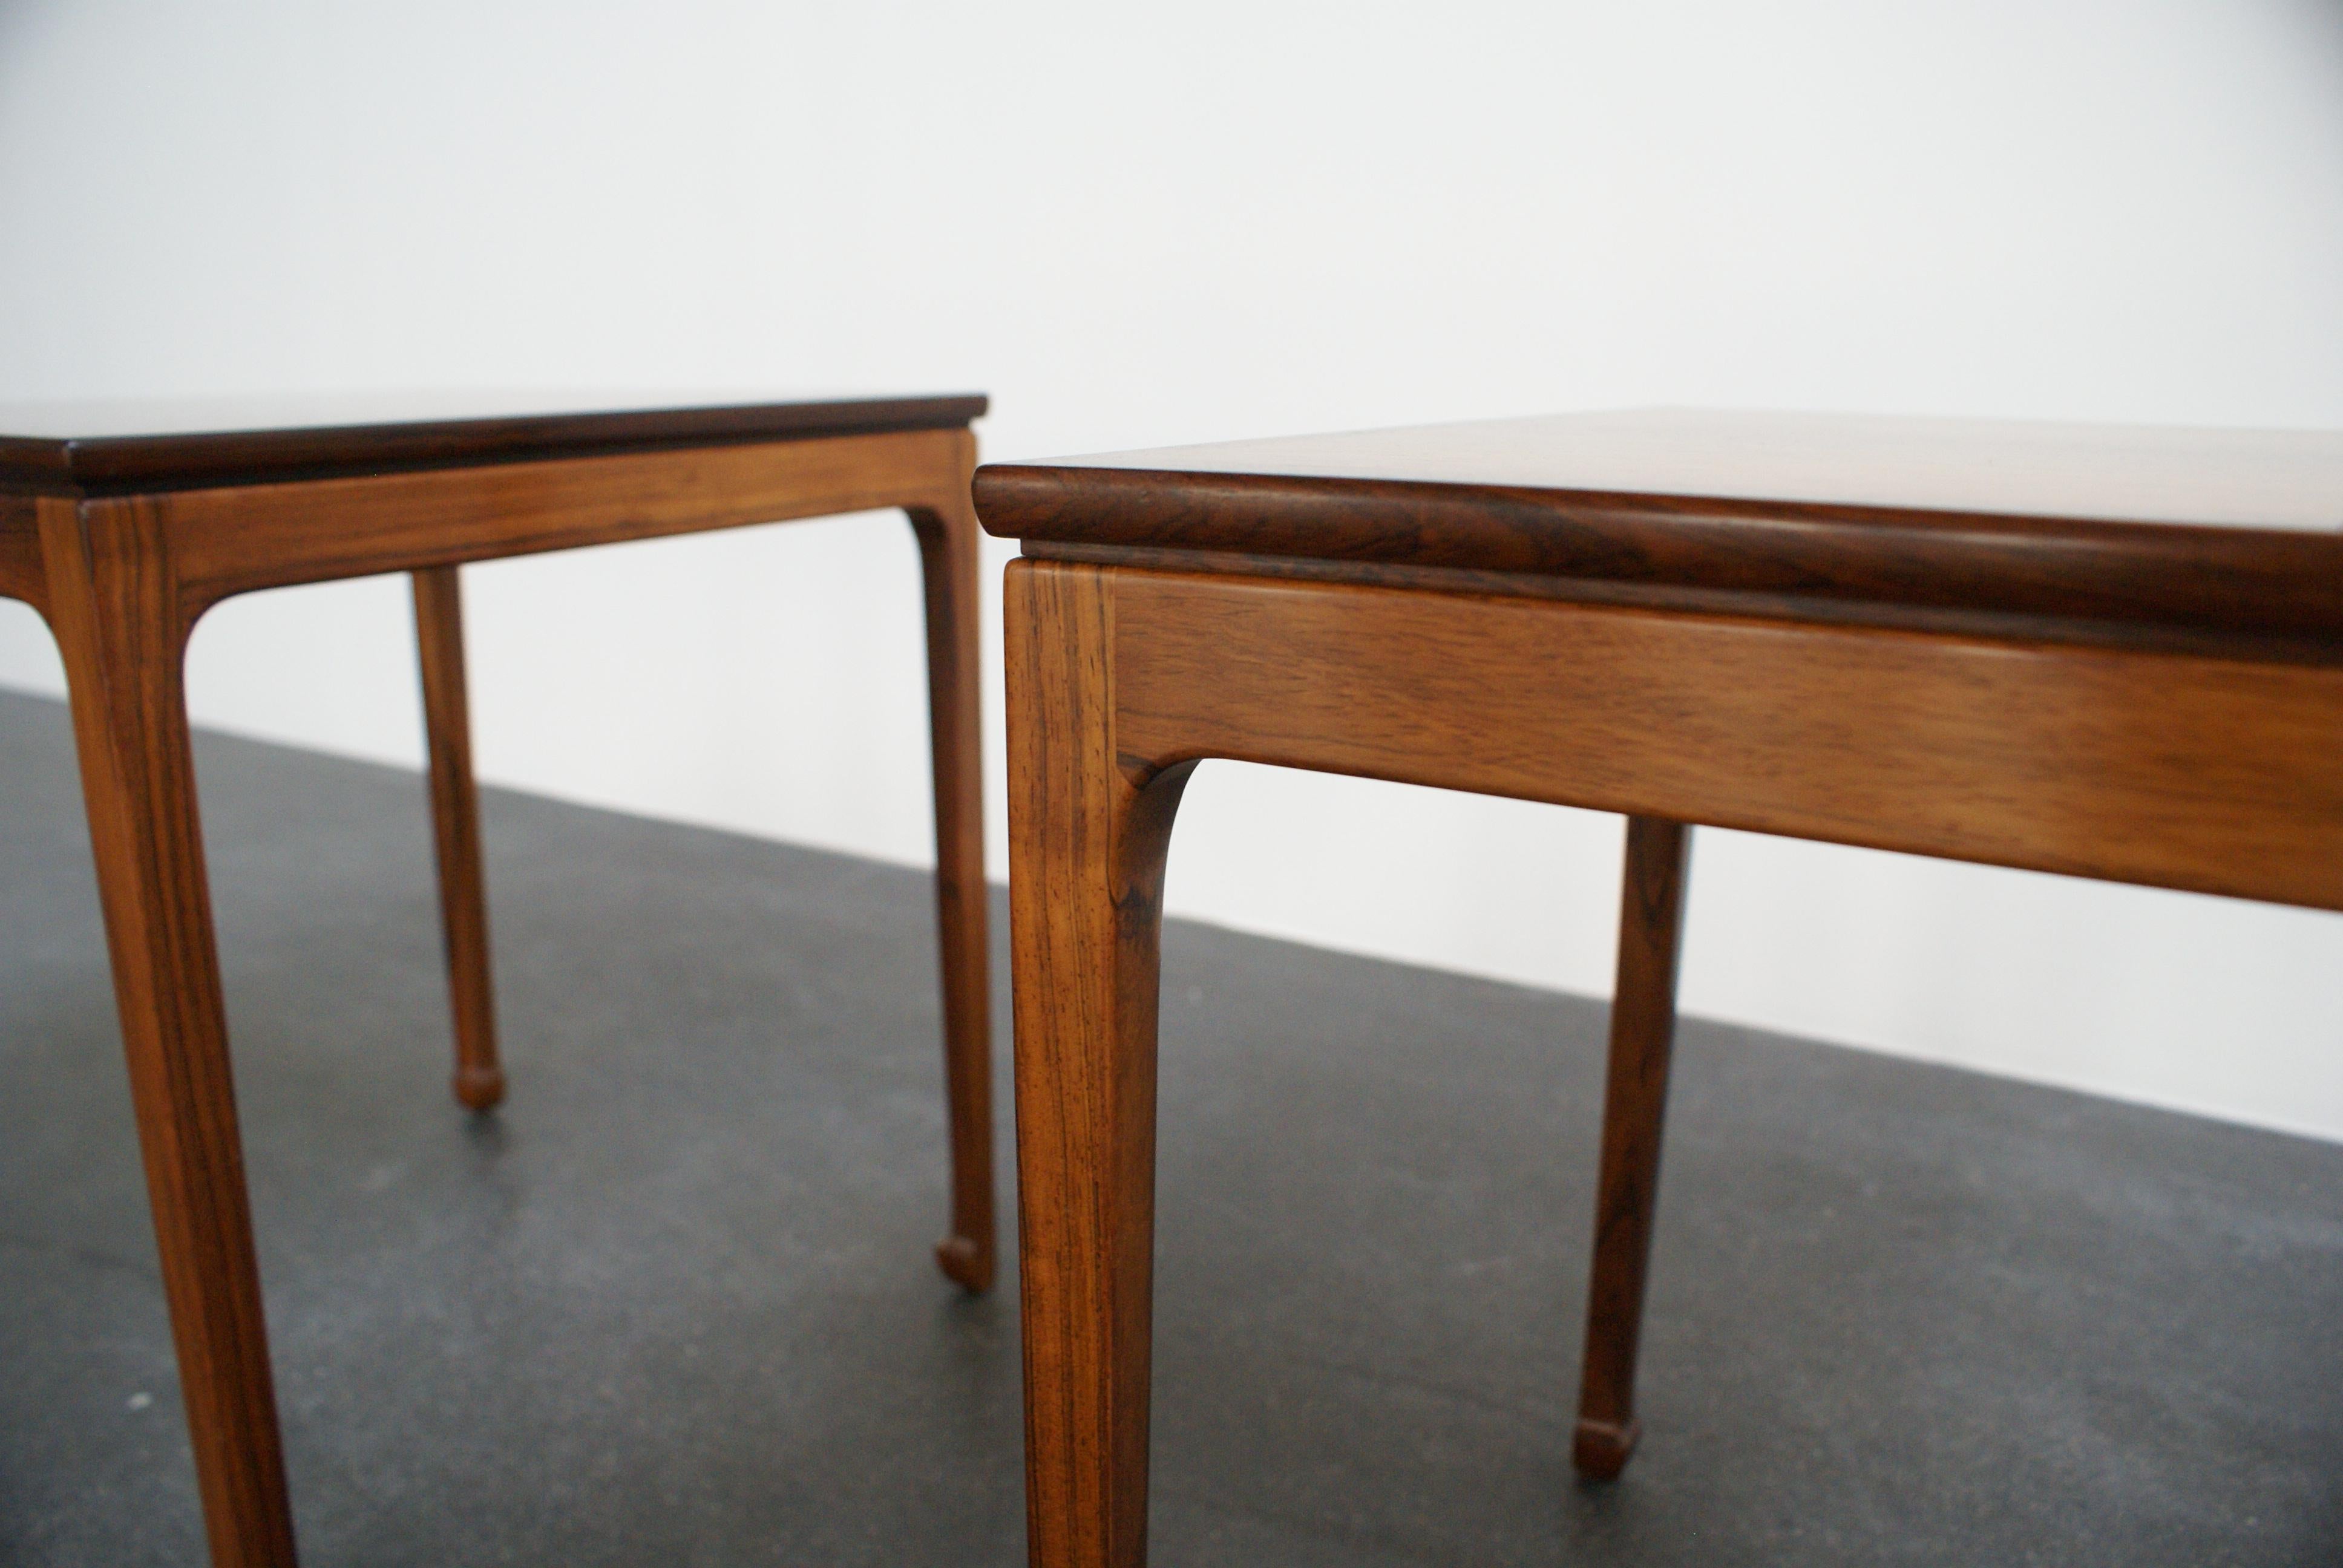 Ole Wanscher Pair of Side Tables in Brazilian Rosewood for A. J. Iversen, 1957 In Excellent Condition For Sale In Copenhagen, DK